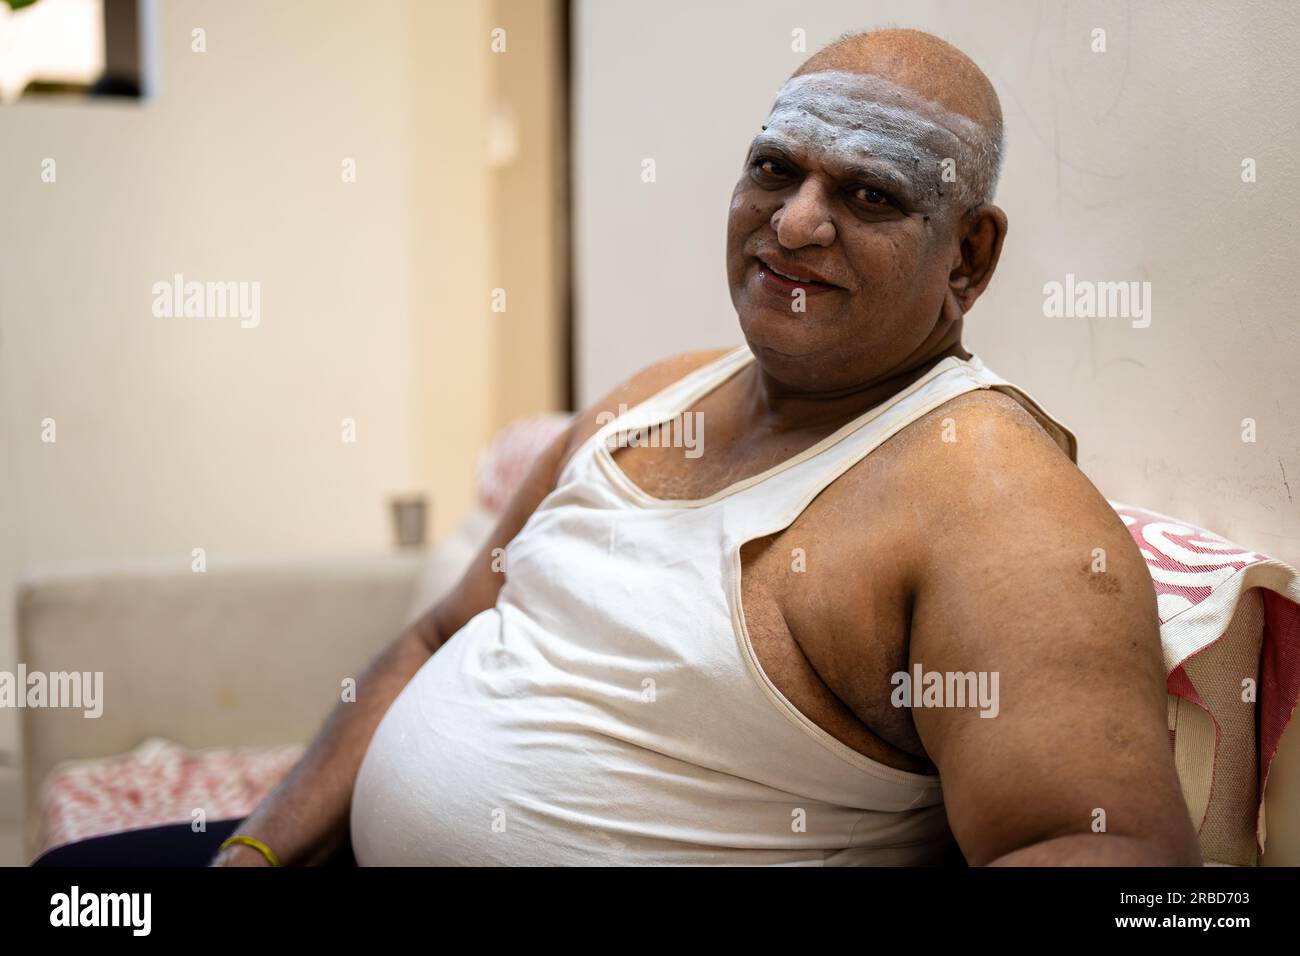 A stock photo of a fat man sitting on a sofa, focused on his belly. Stock Photo